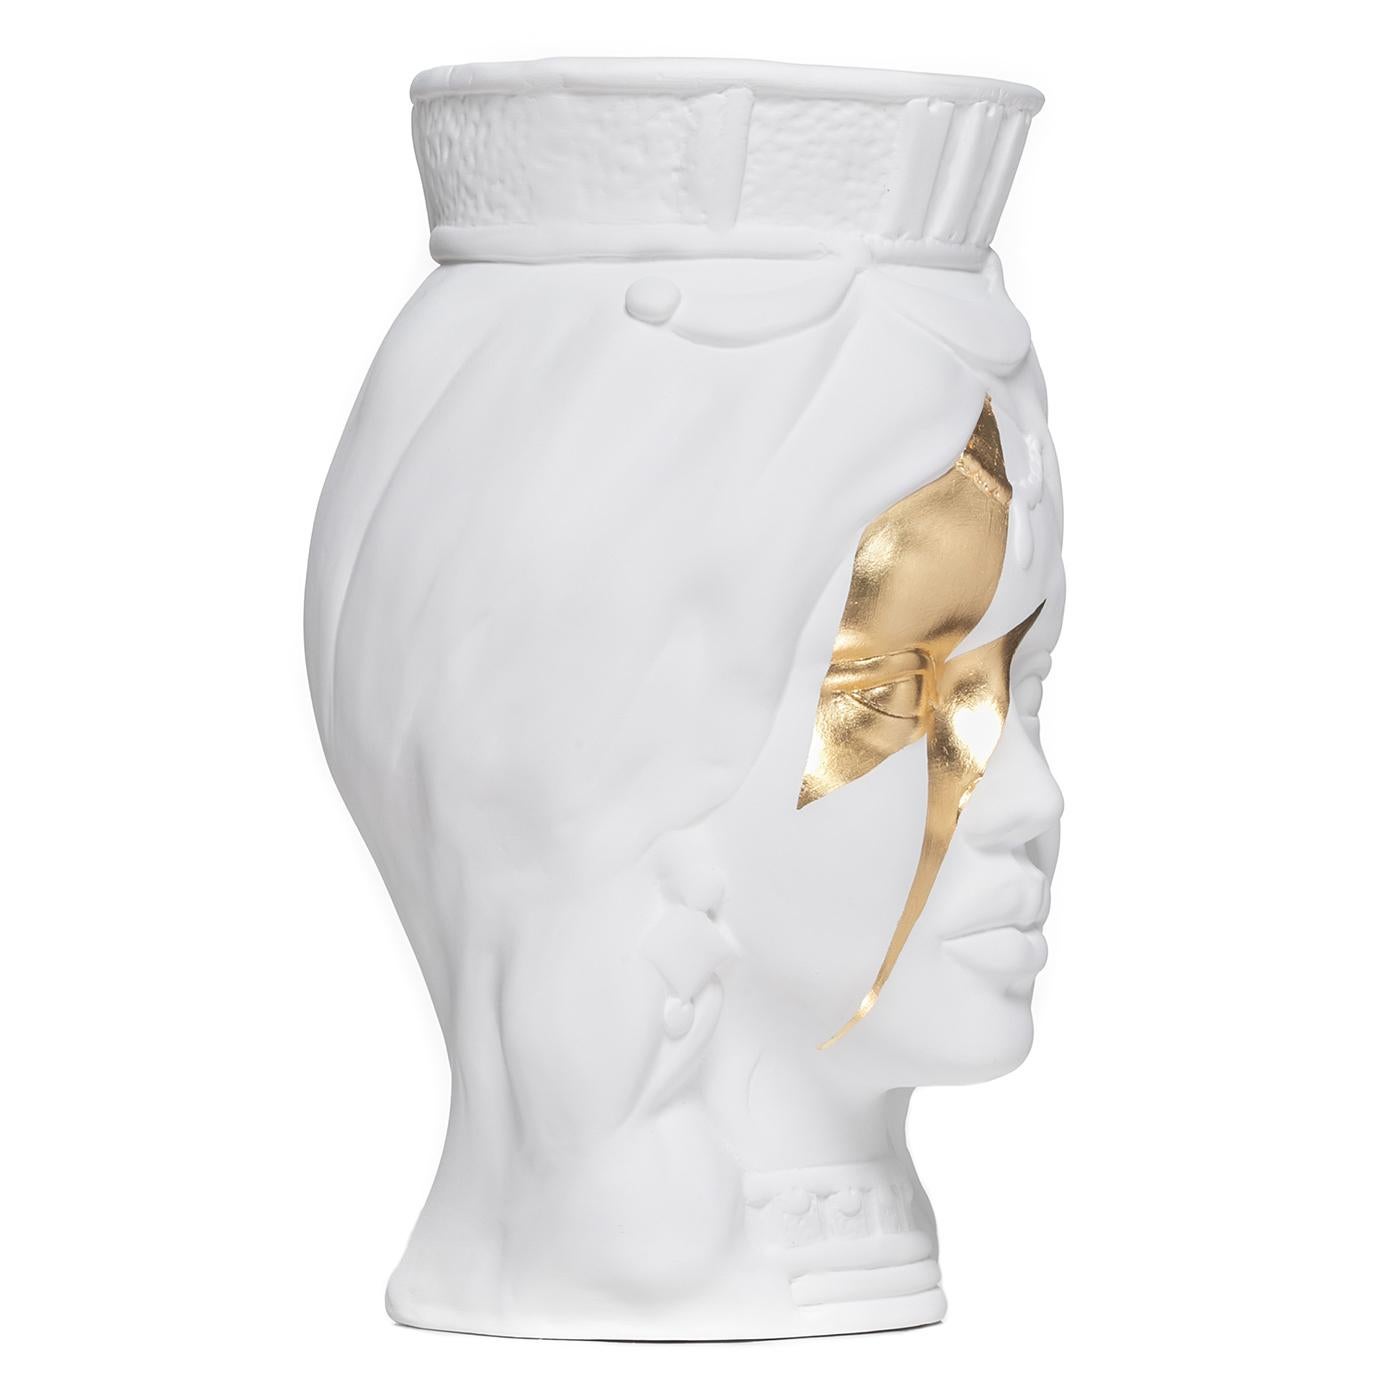 Masterfully handcrafted of white clay, this stunning vase depicts the face of a young woman adorned with a crown and jewels suggesting a noble origin. Her captivating gaze is enhanced by powerful lightning made of gold leaf marking the left eye.